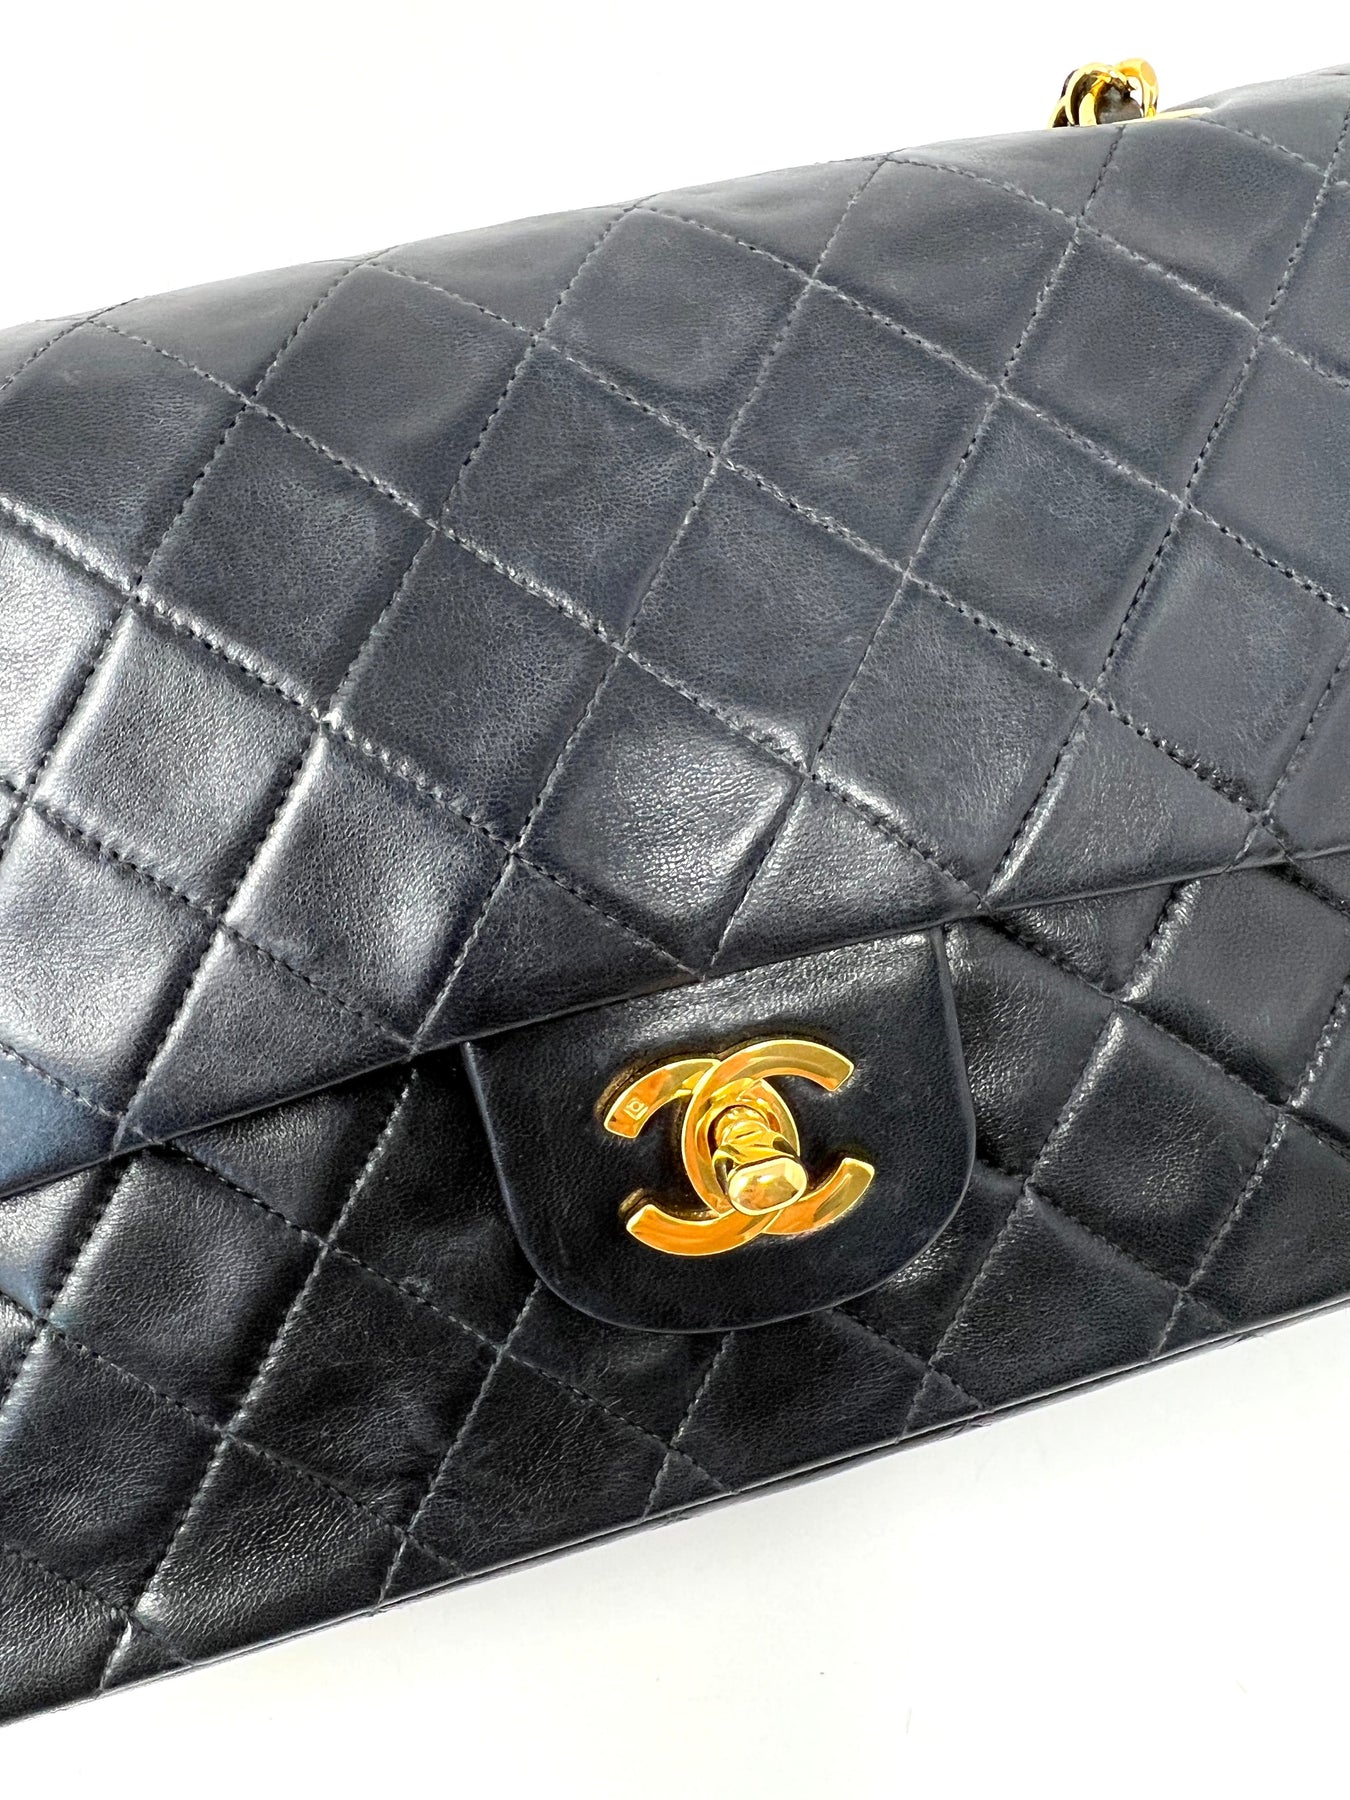 chanel quilted flap bag medium